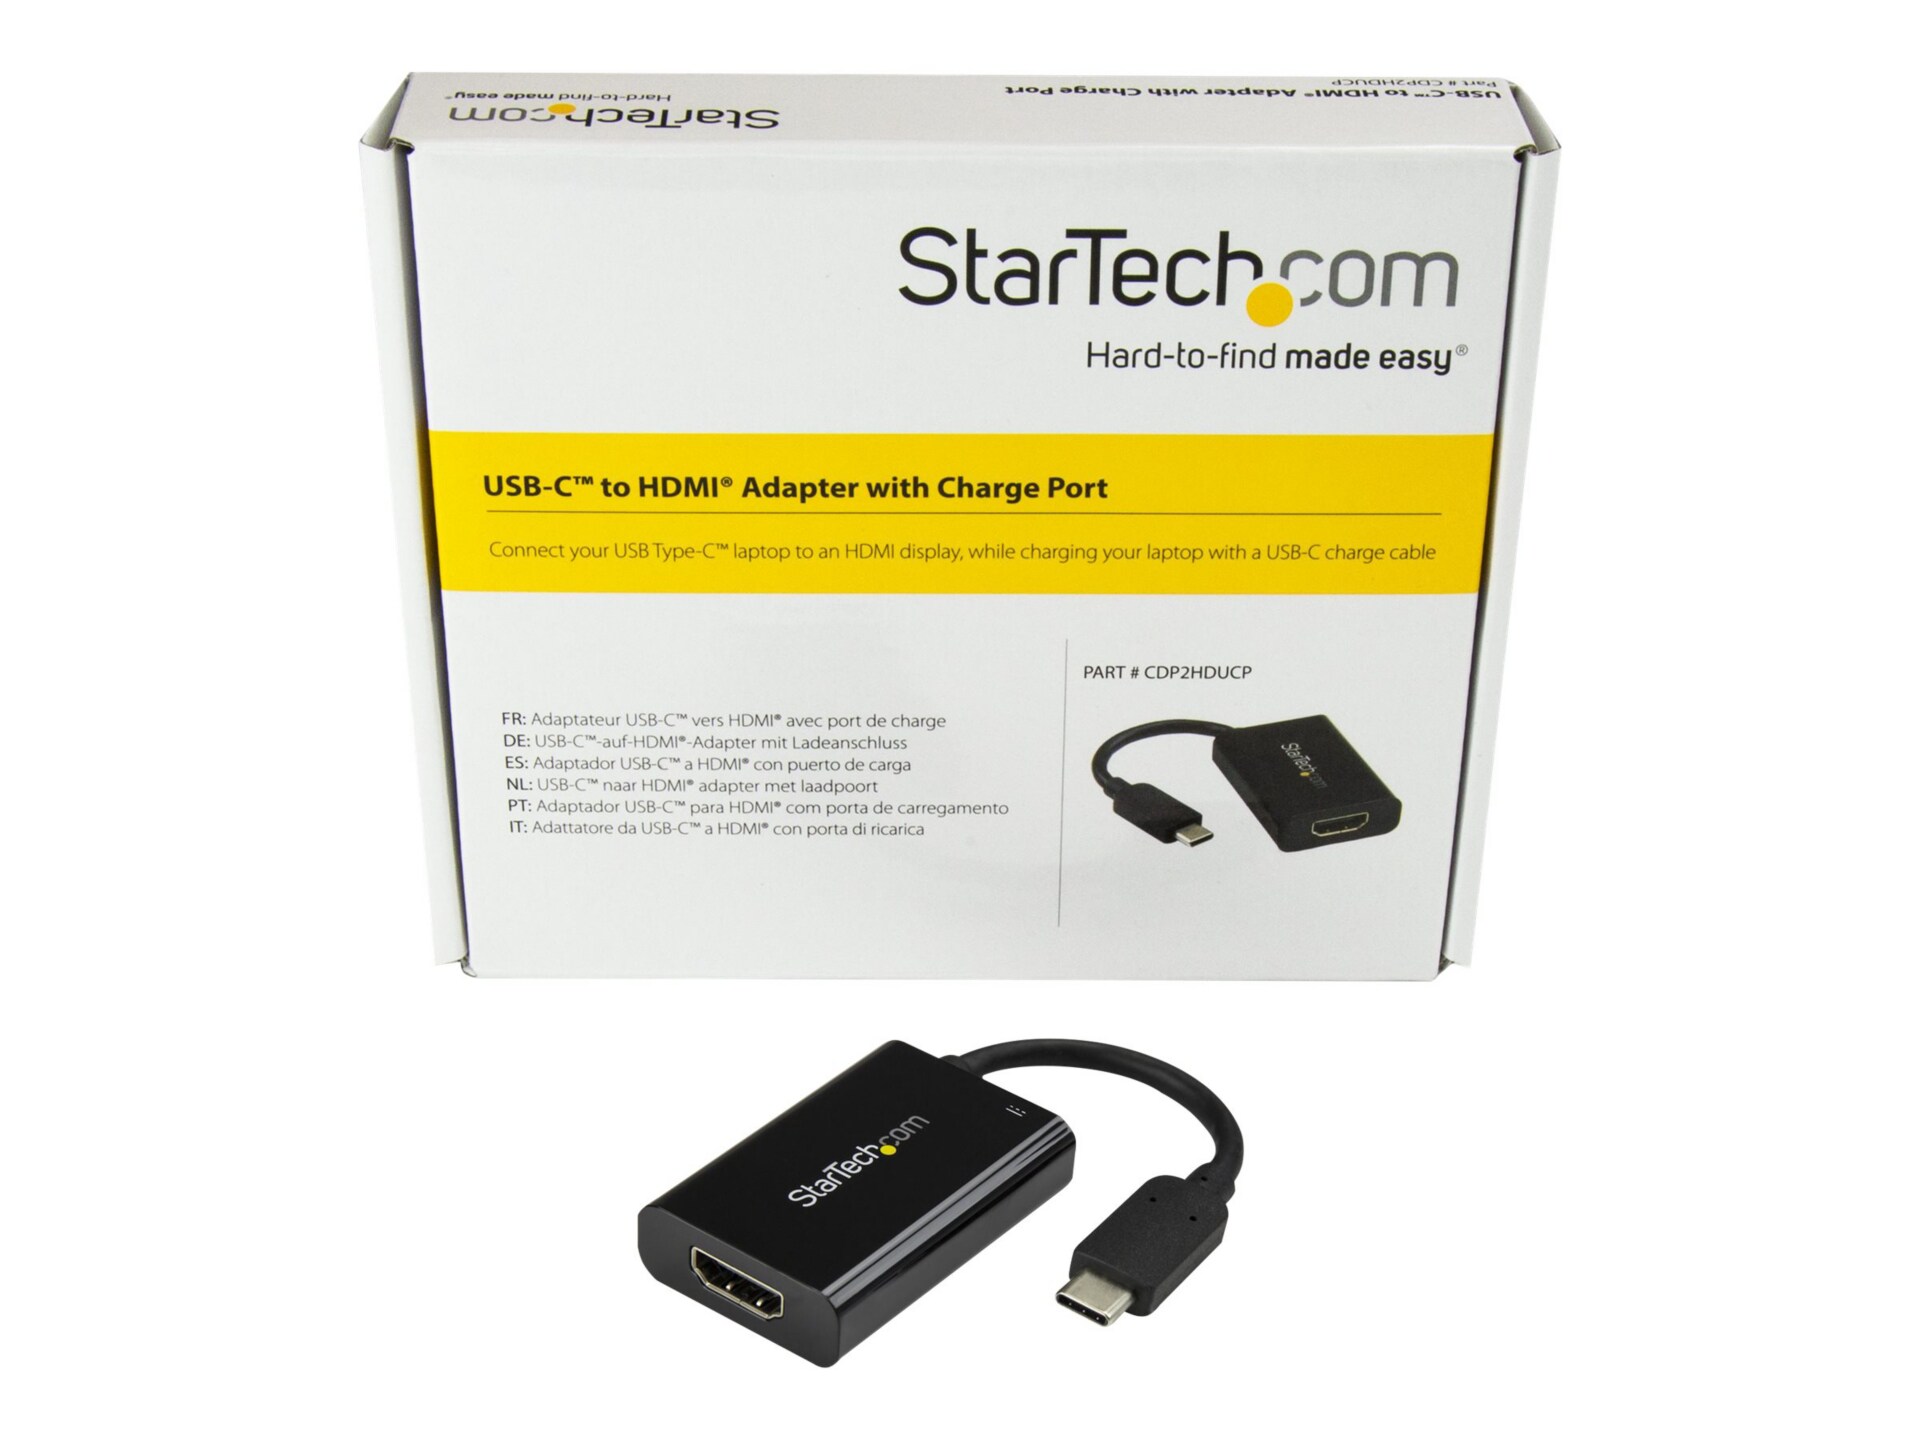 StarTech.com USB C to HDMI 2.0 Adapter 4K 60Hz with 60W Power Delivery Pass-Through Charging - USB Type-C to HDMI Video